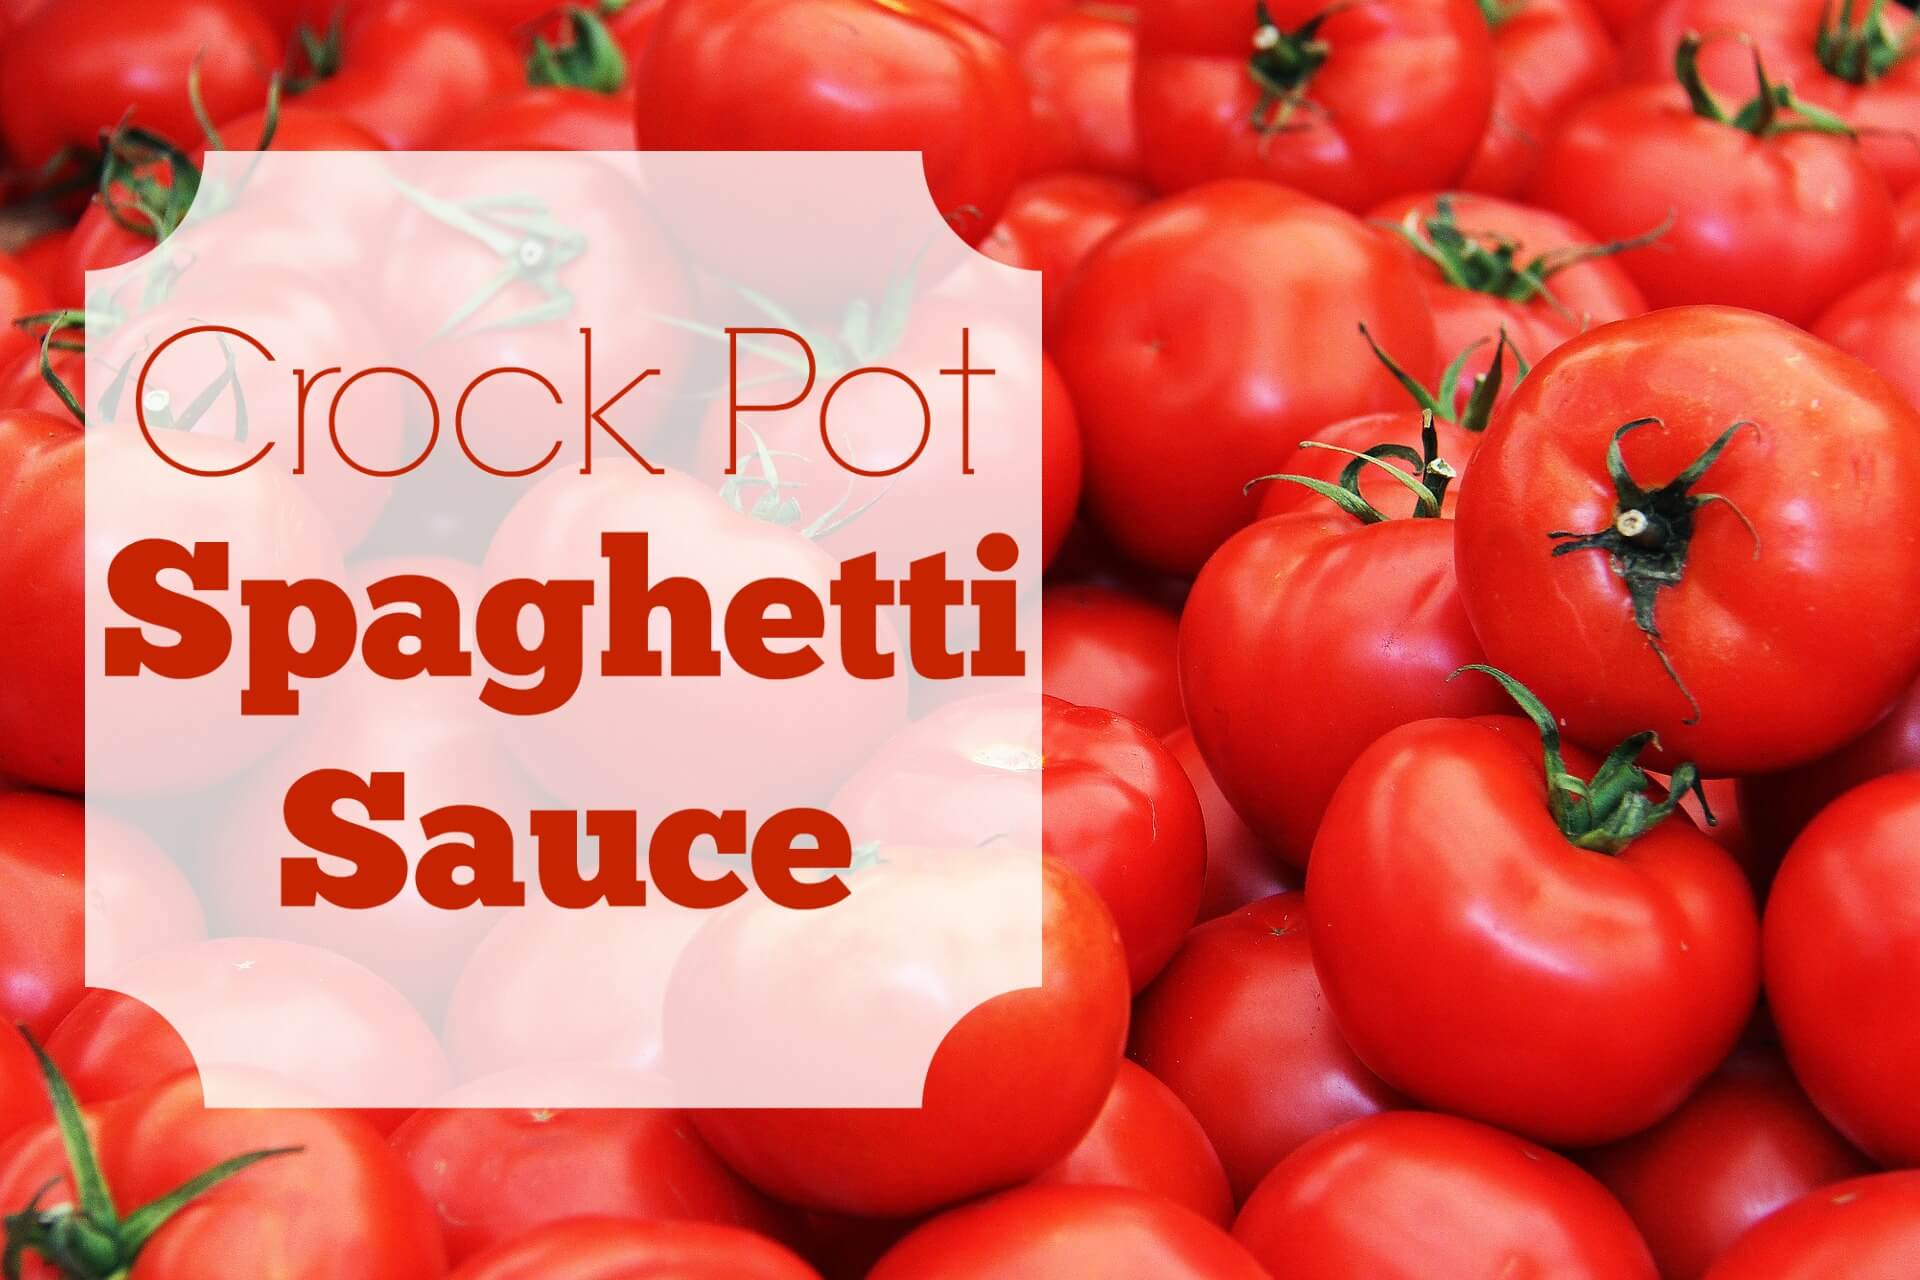 This spaghetti sauce is so fresh and delicious, you'll never want to buy jarred sauce again. You'll love this healthier, tastier sauce!